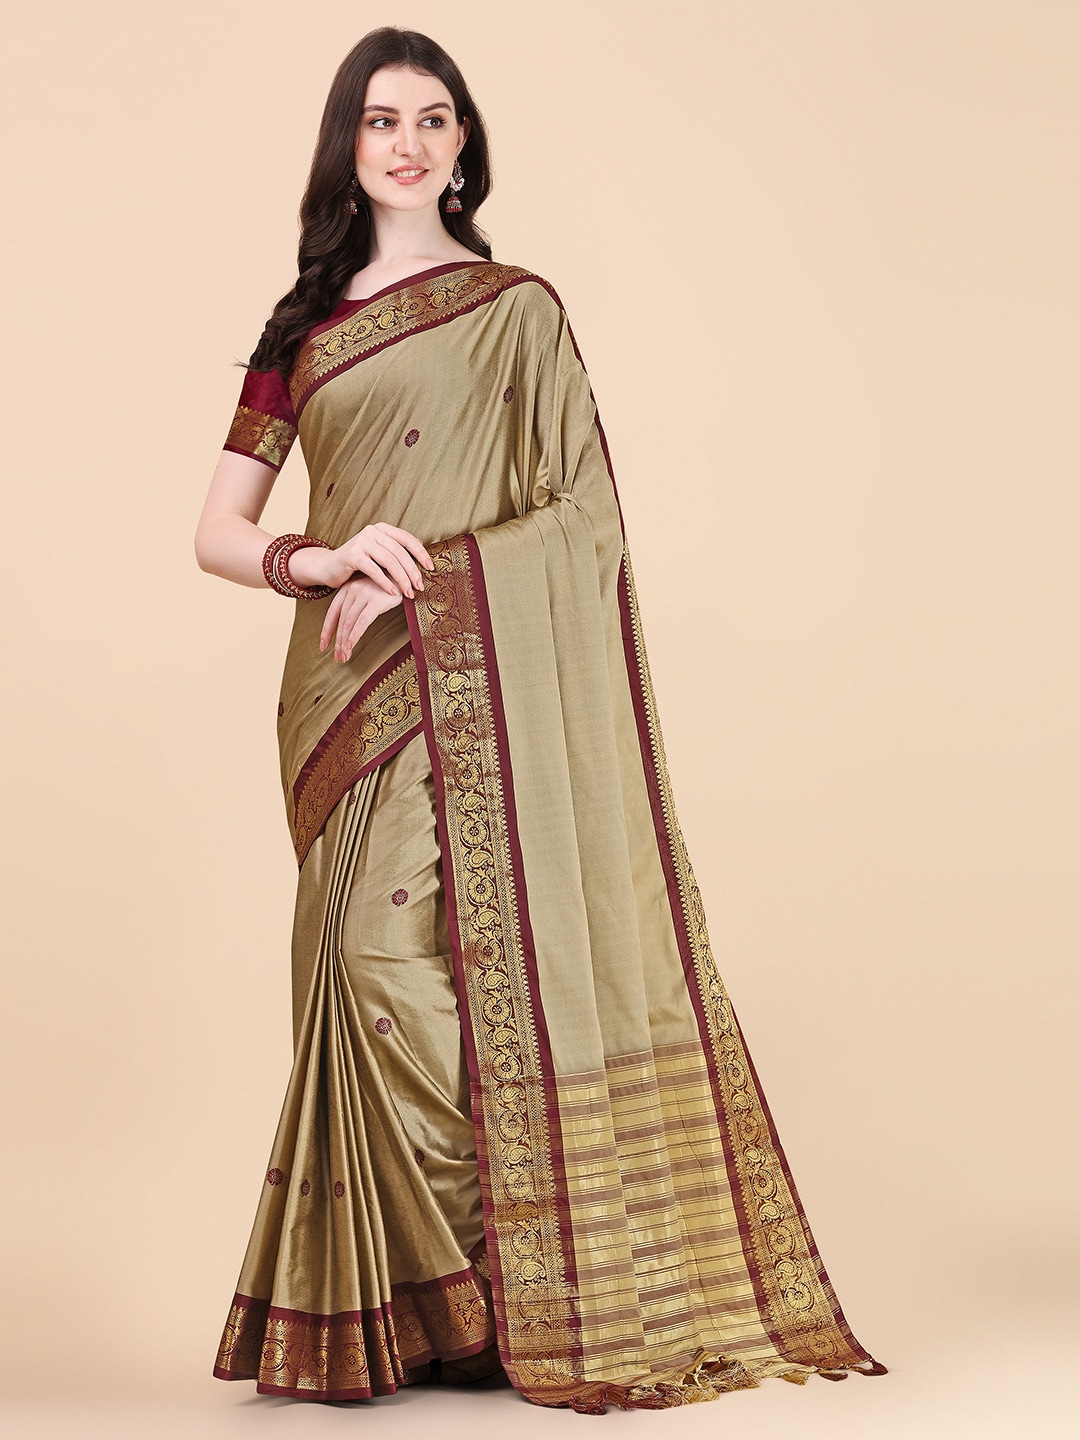 Buy Women's Ilkal Cotton Blend Star Pattern Handloom Saree with Solid Shiny  Satin Weave Resham Border (B Green) at Amazon.in